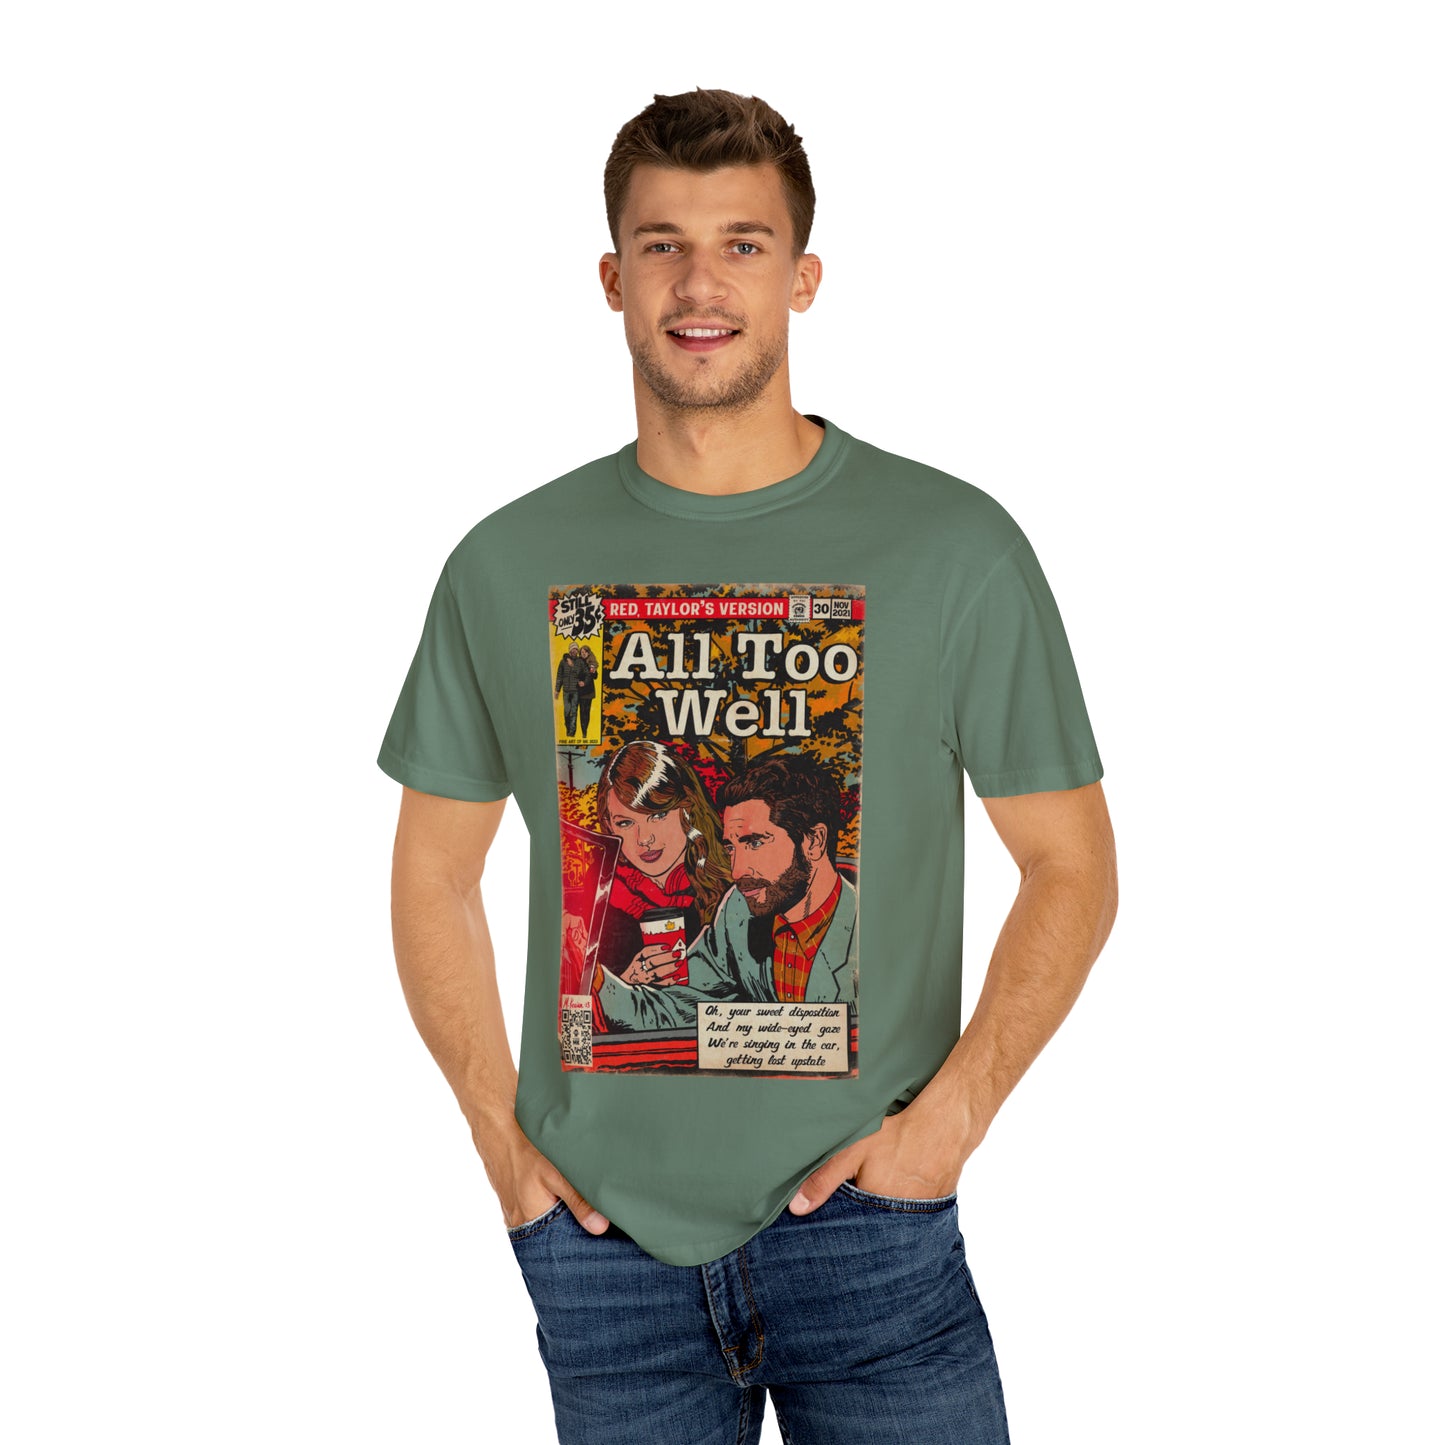 Taylor Swift - All Too Well - Unisex Comfort Colors T-shirt